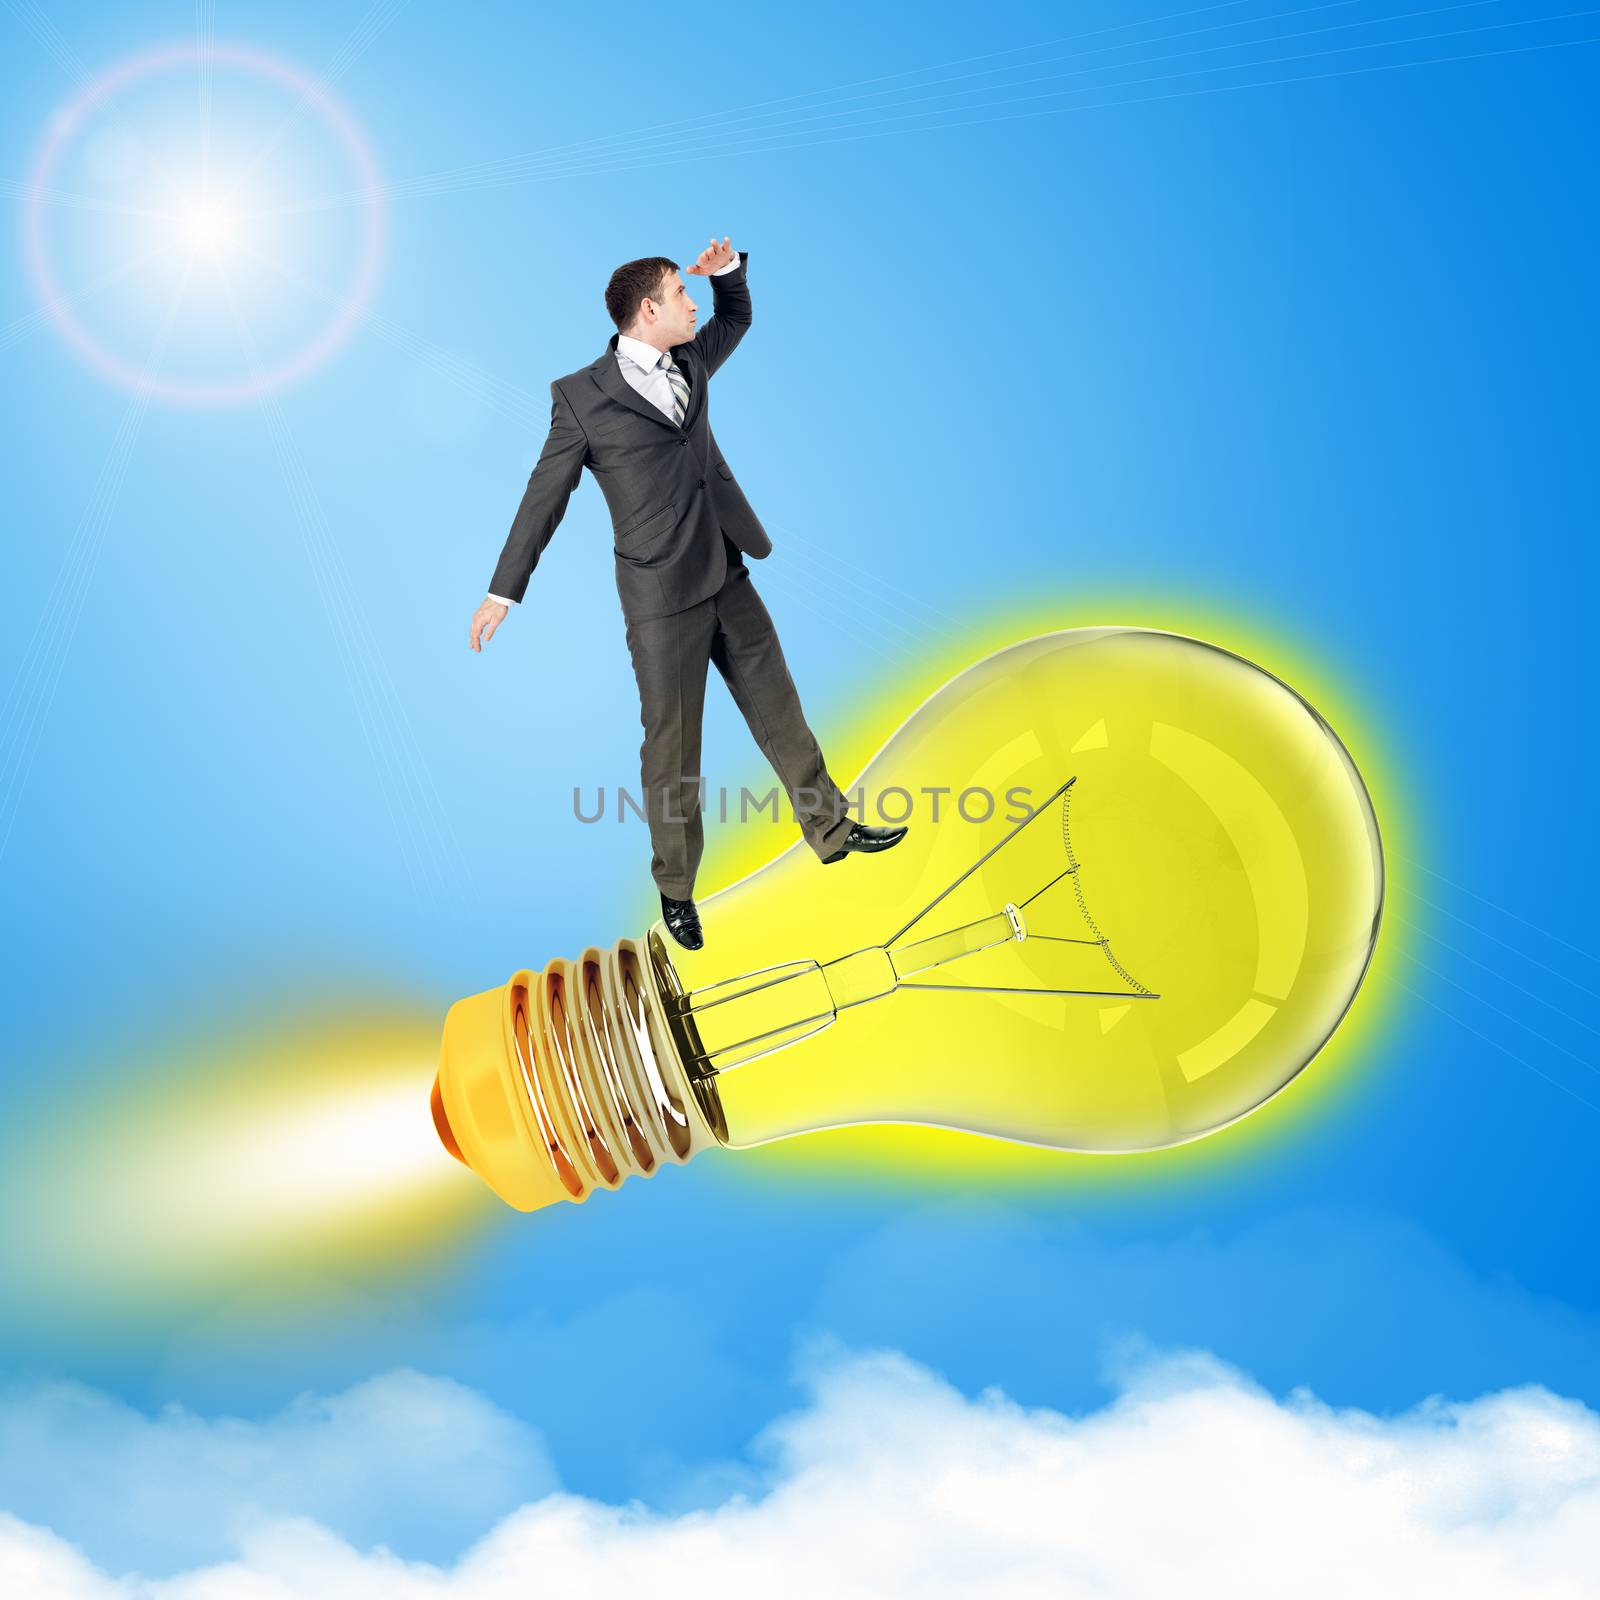 Man travel on bulb in sky with clouds